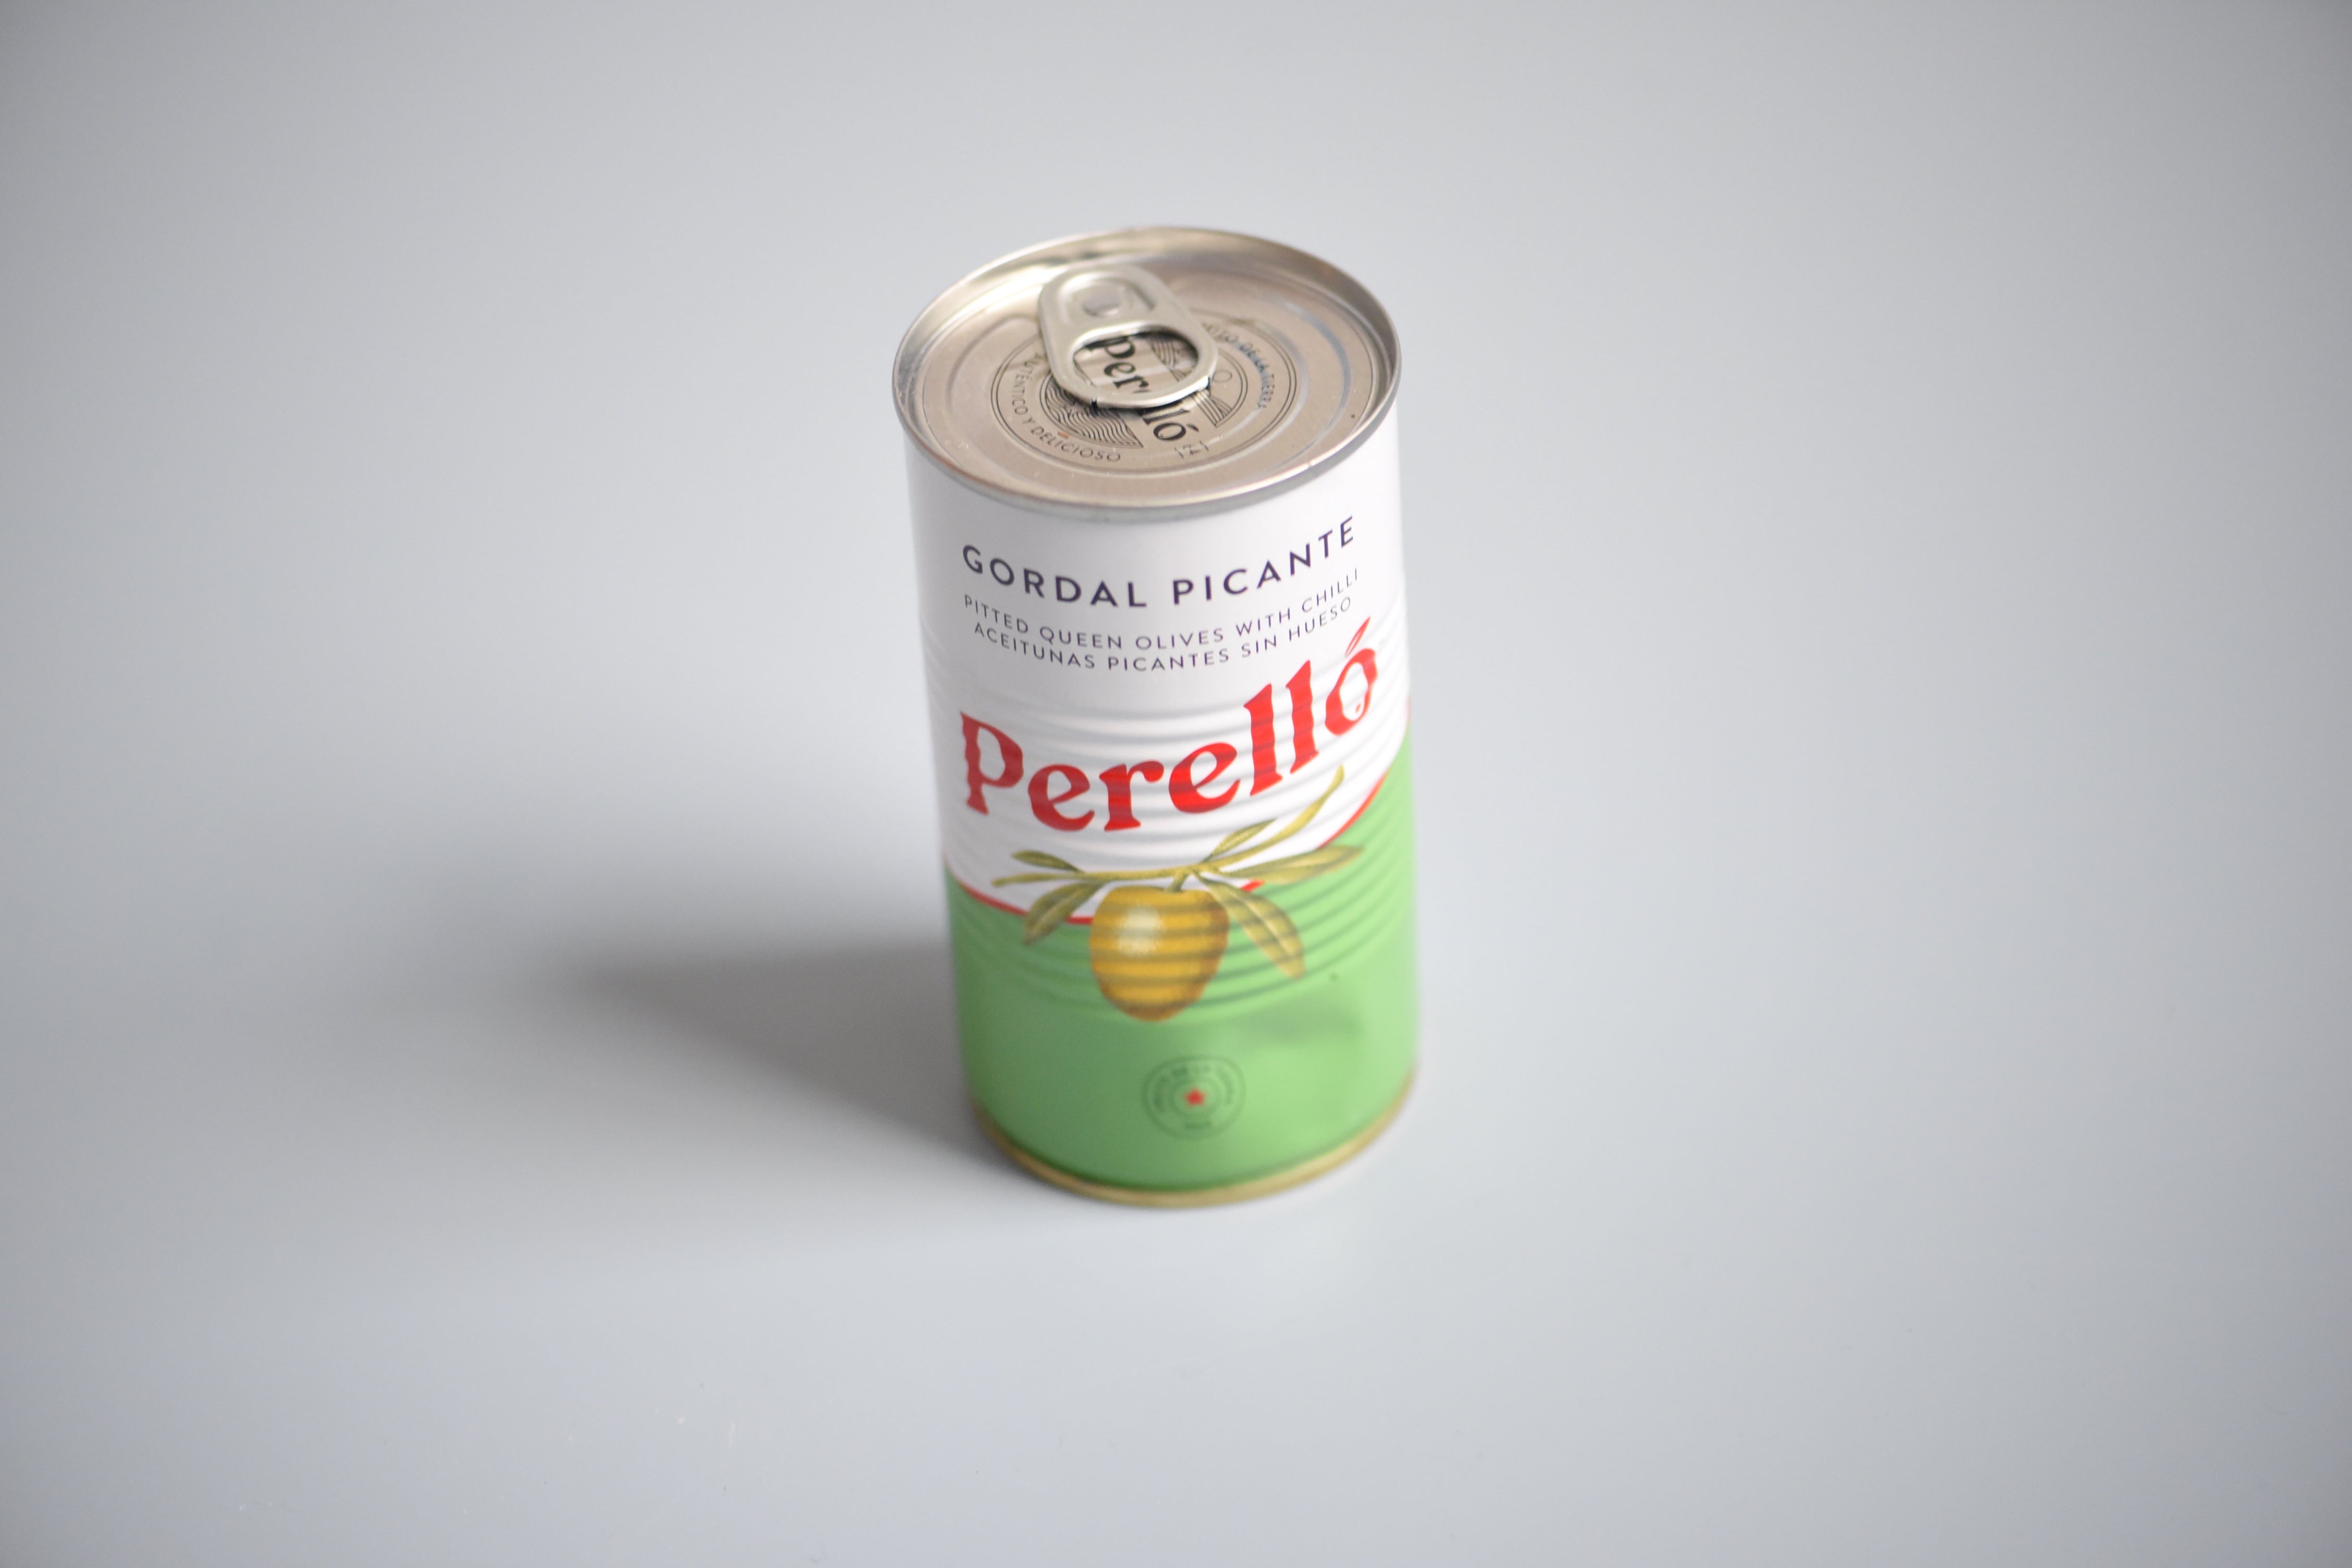 Perello Gordal Picante - Pitted Queen Olives with chilli 350g